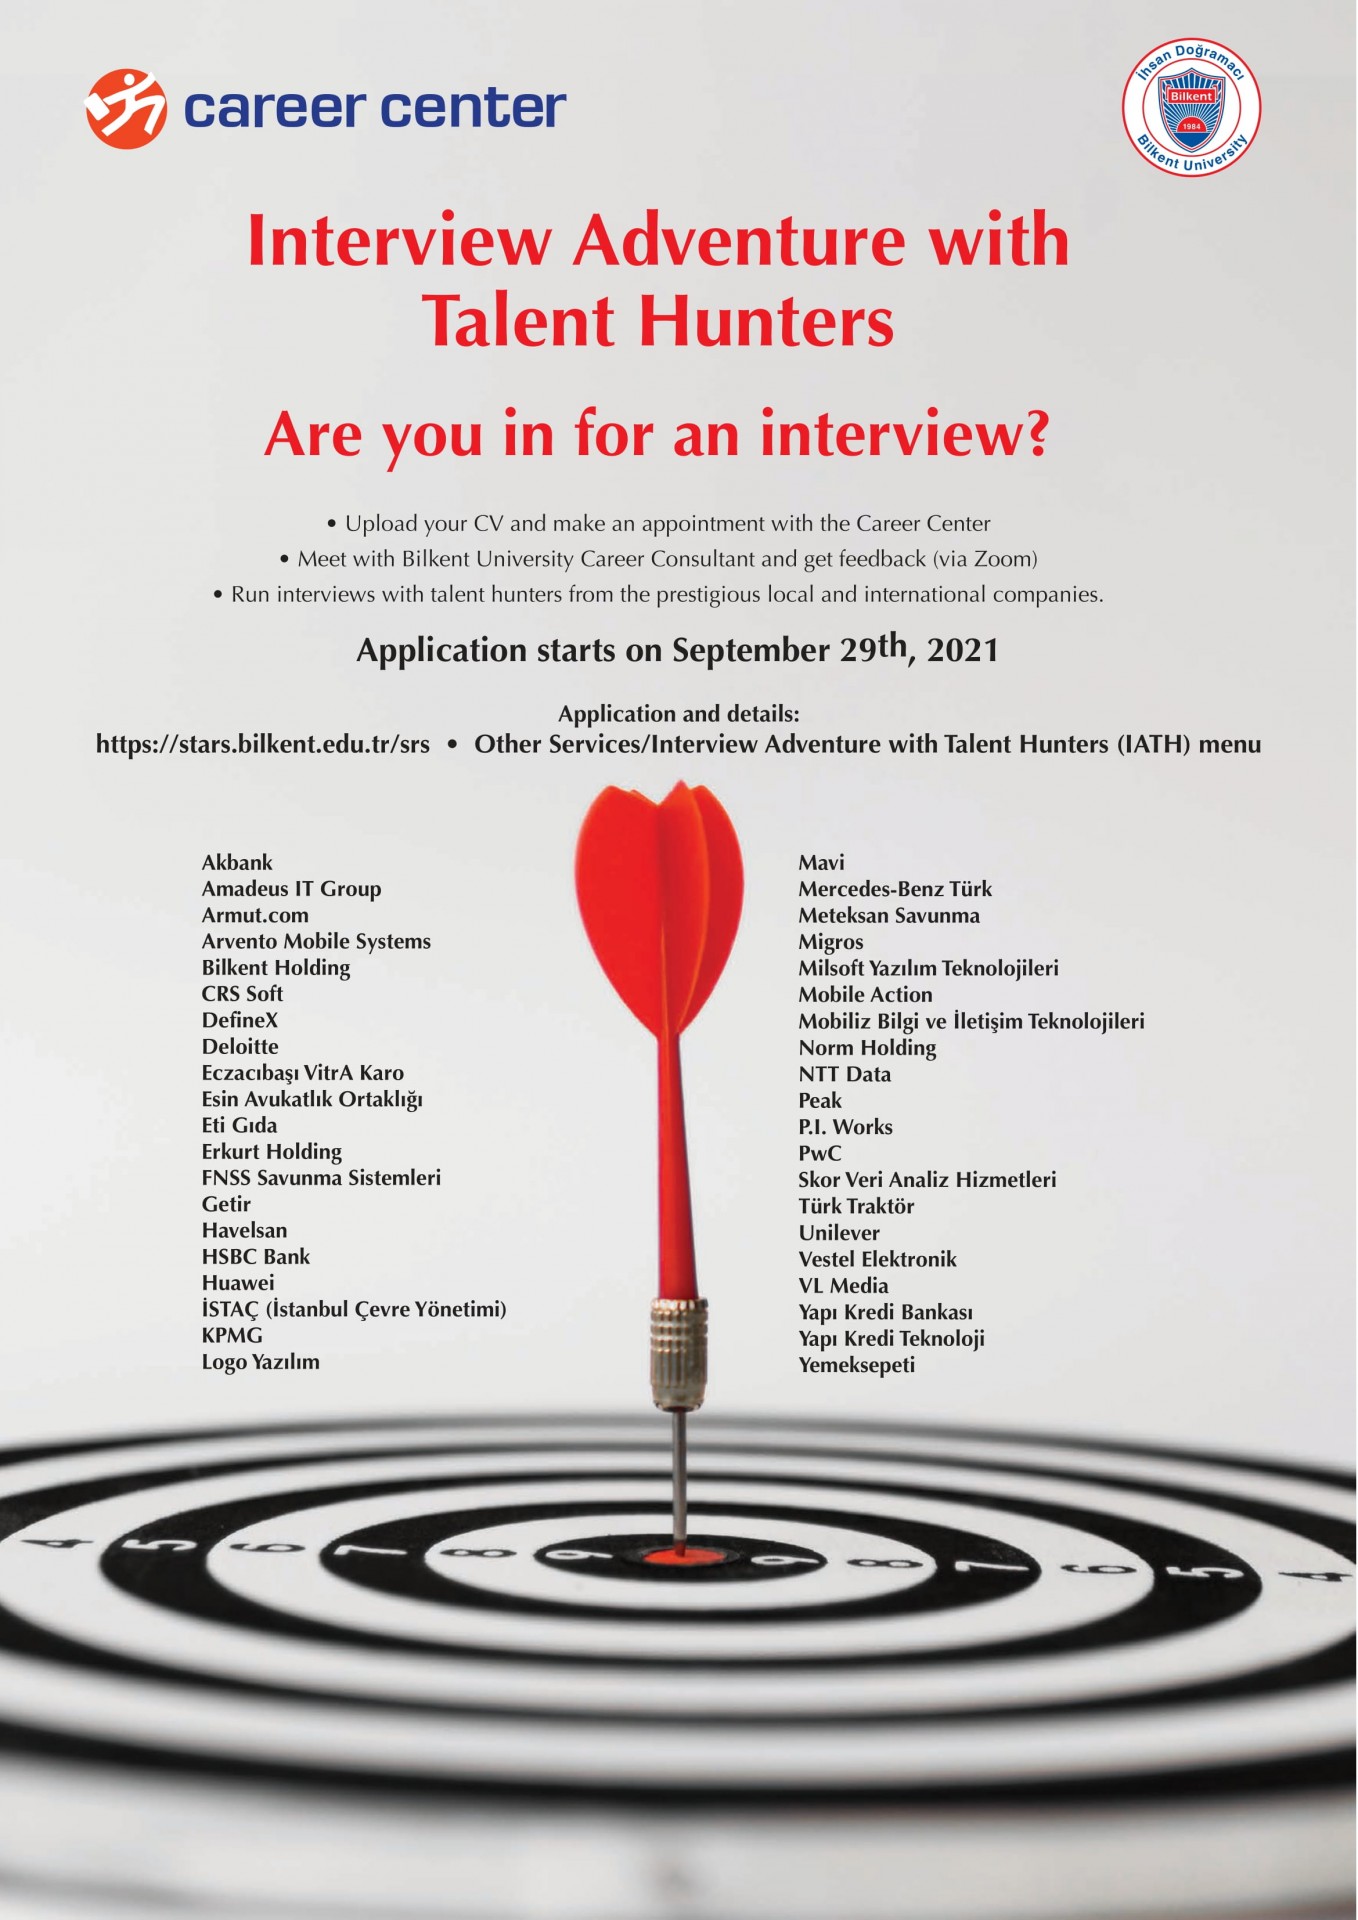 INTERVIEW ADVENTURE WITH TALENT HUNTERS 2